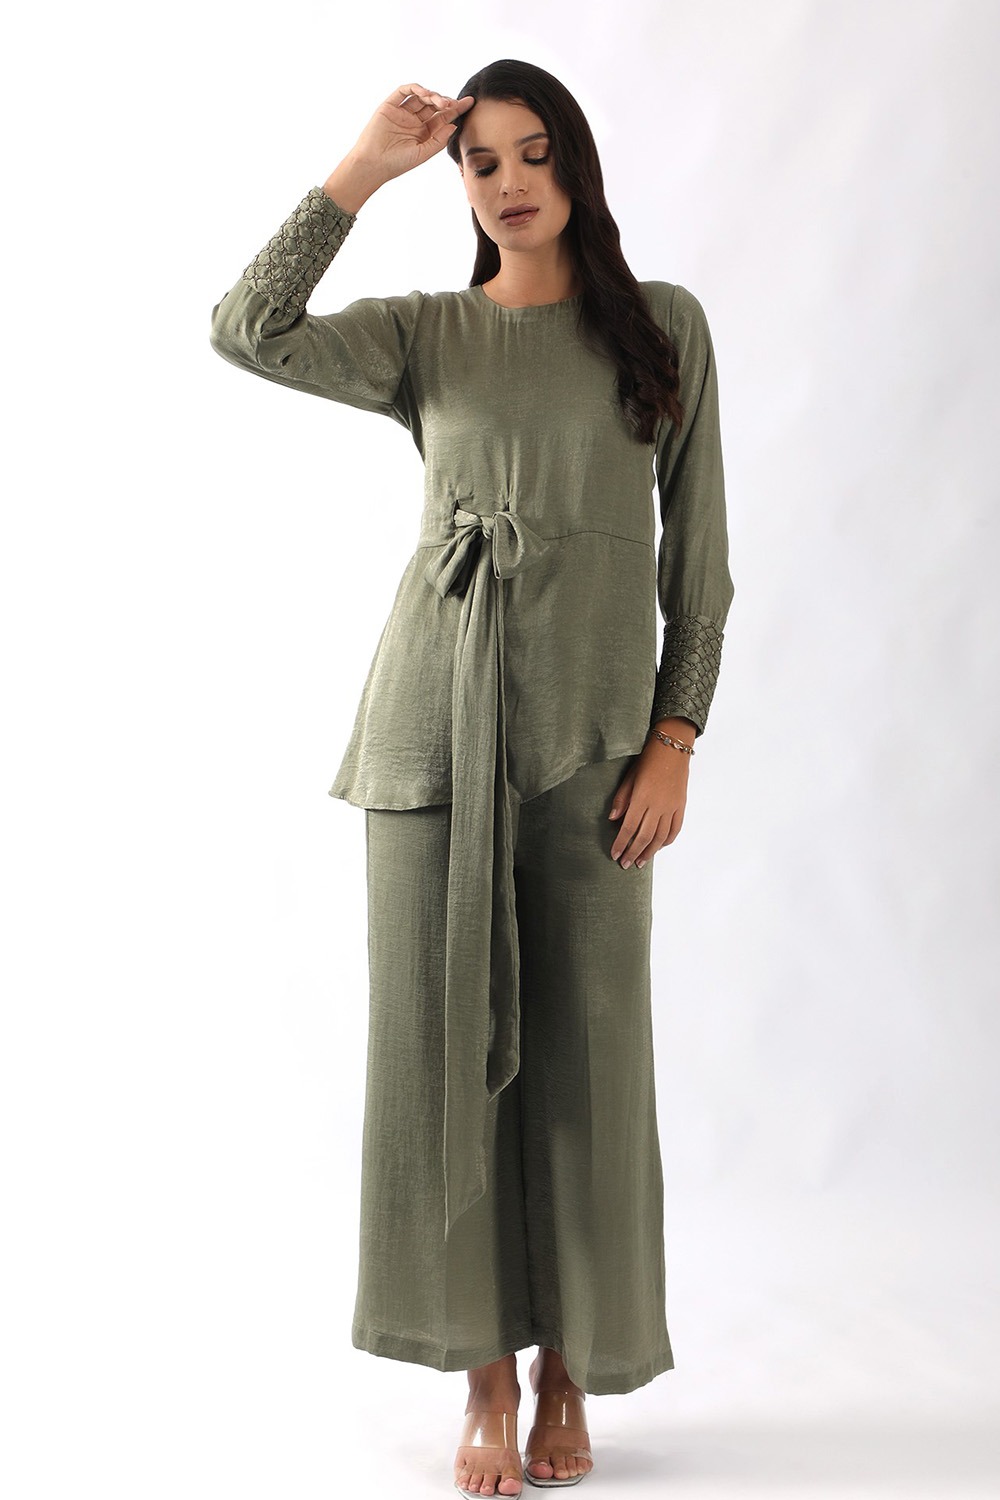 Olive Green cuff embroideref co-ord set